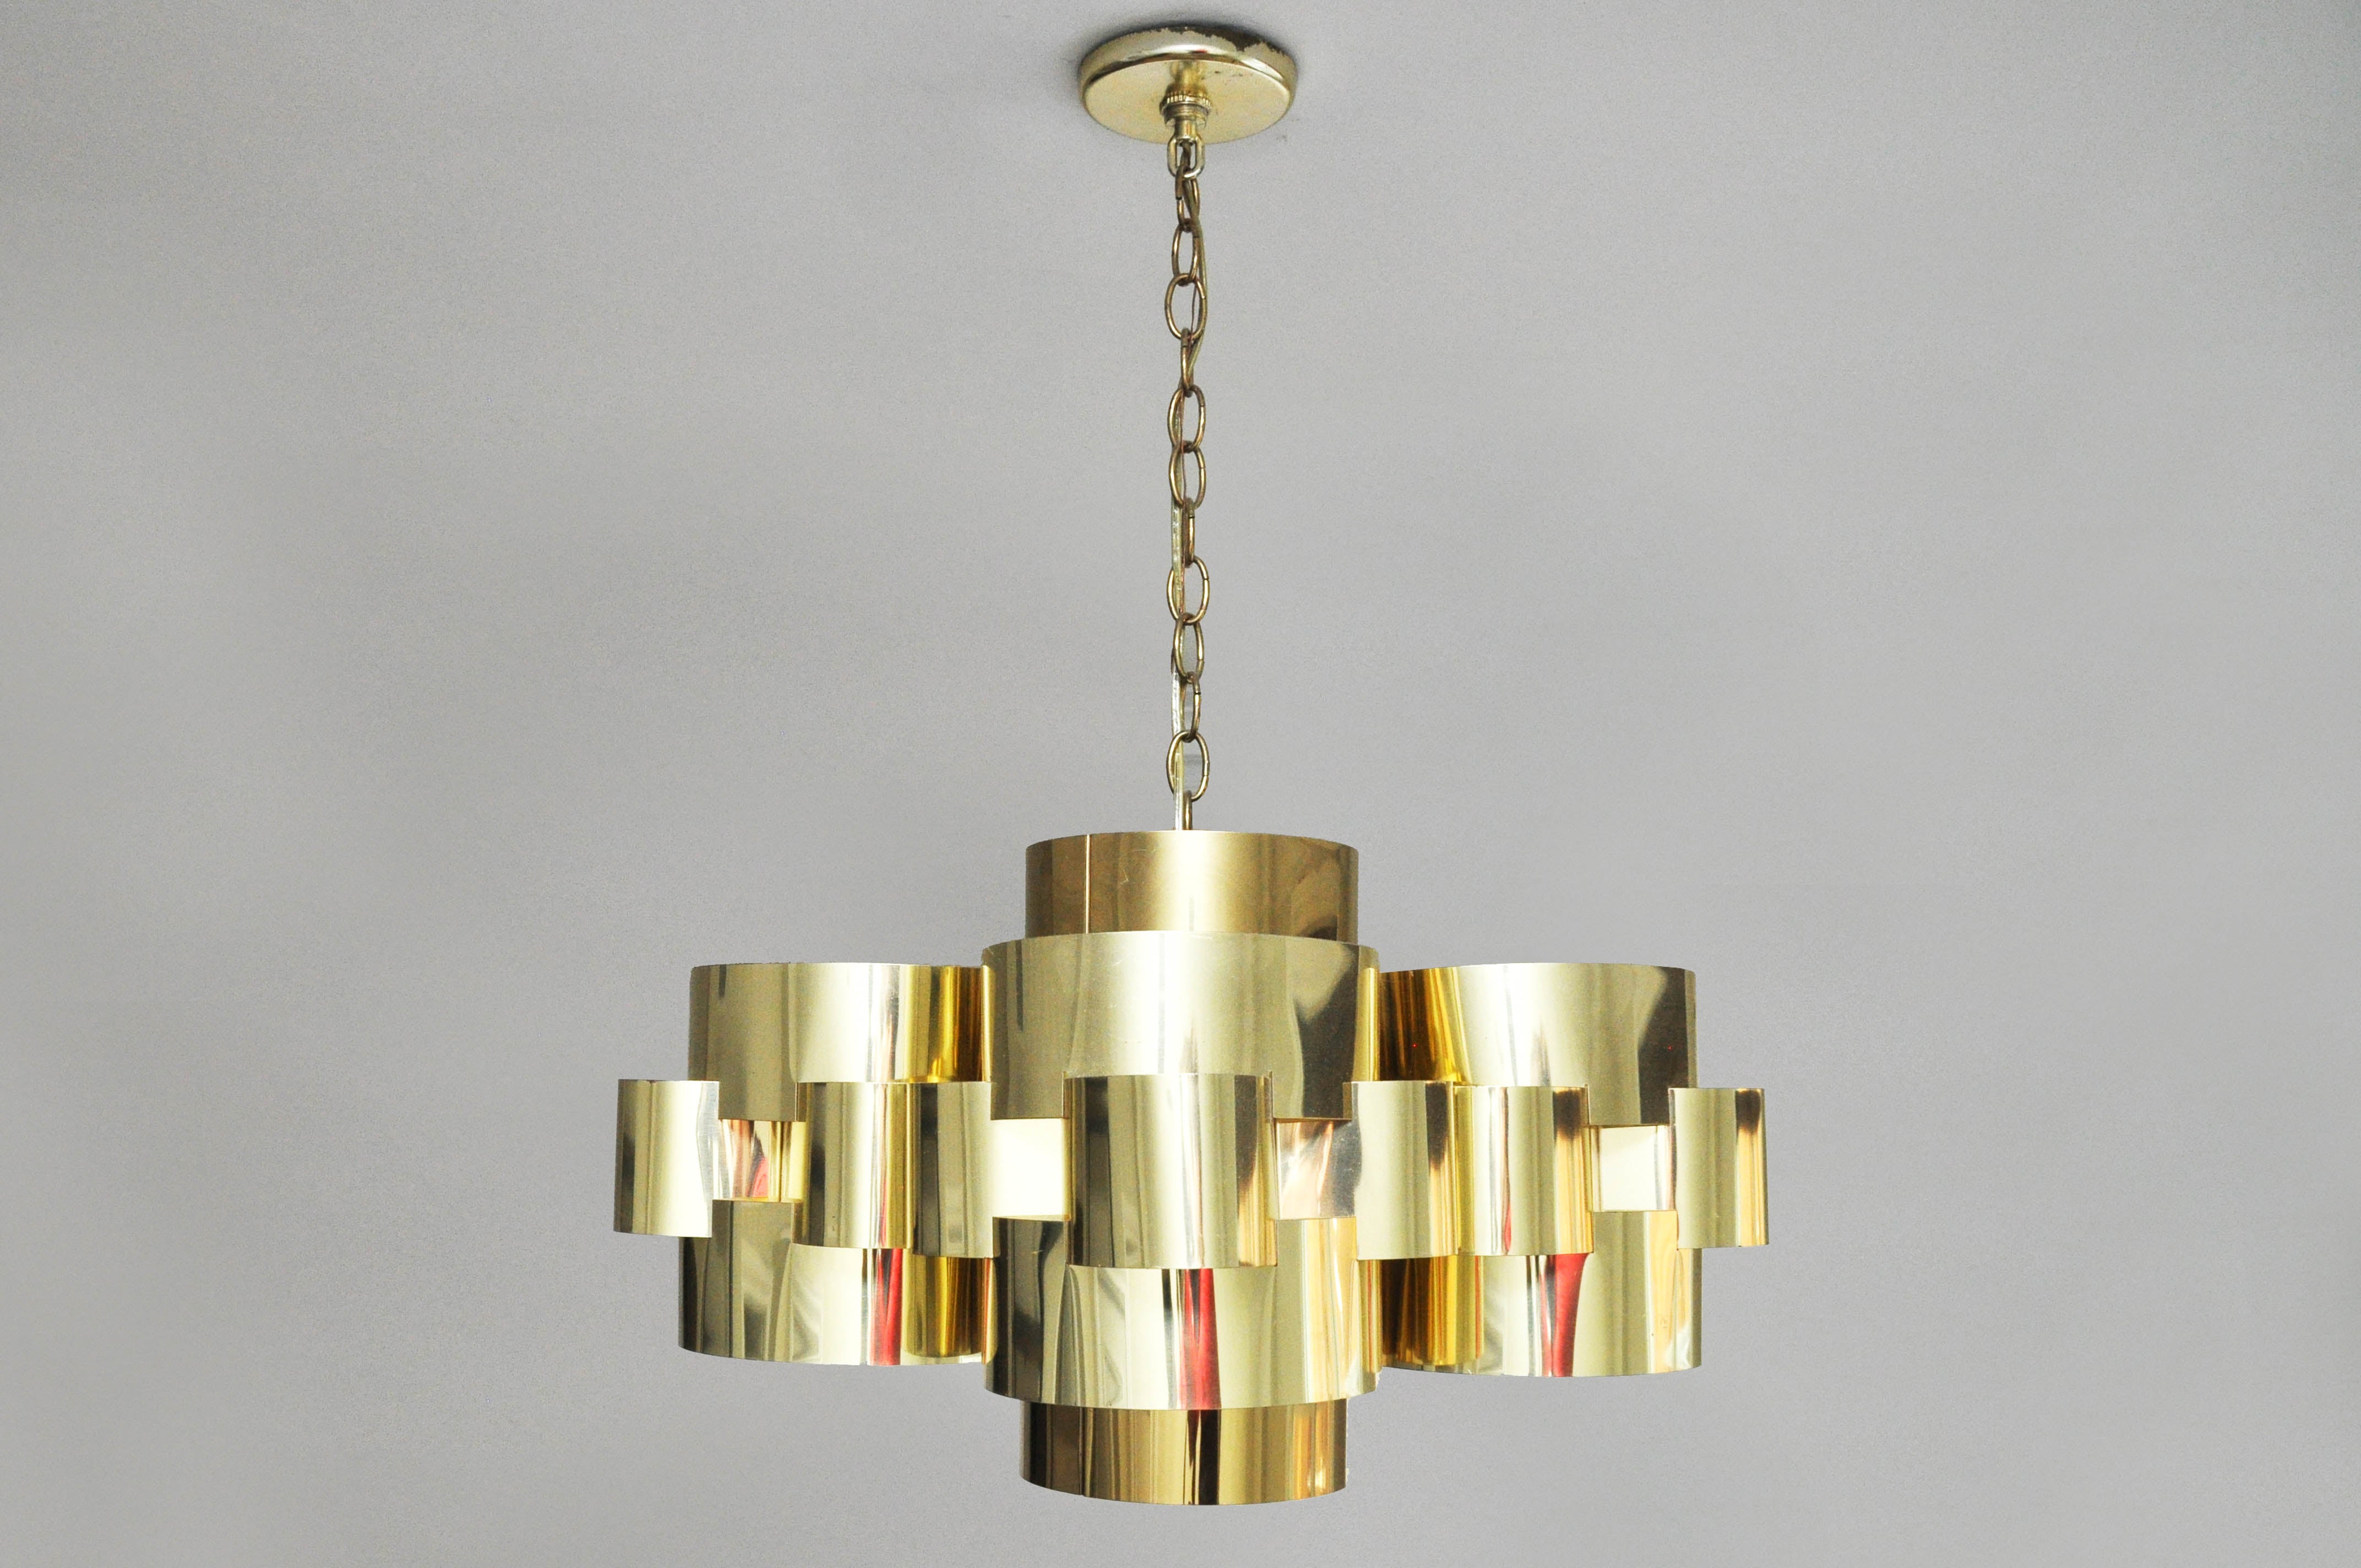 Polished 1970s Brass Cloud Chandelier by Curtis Jere